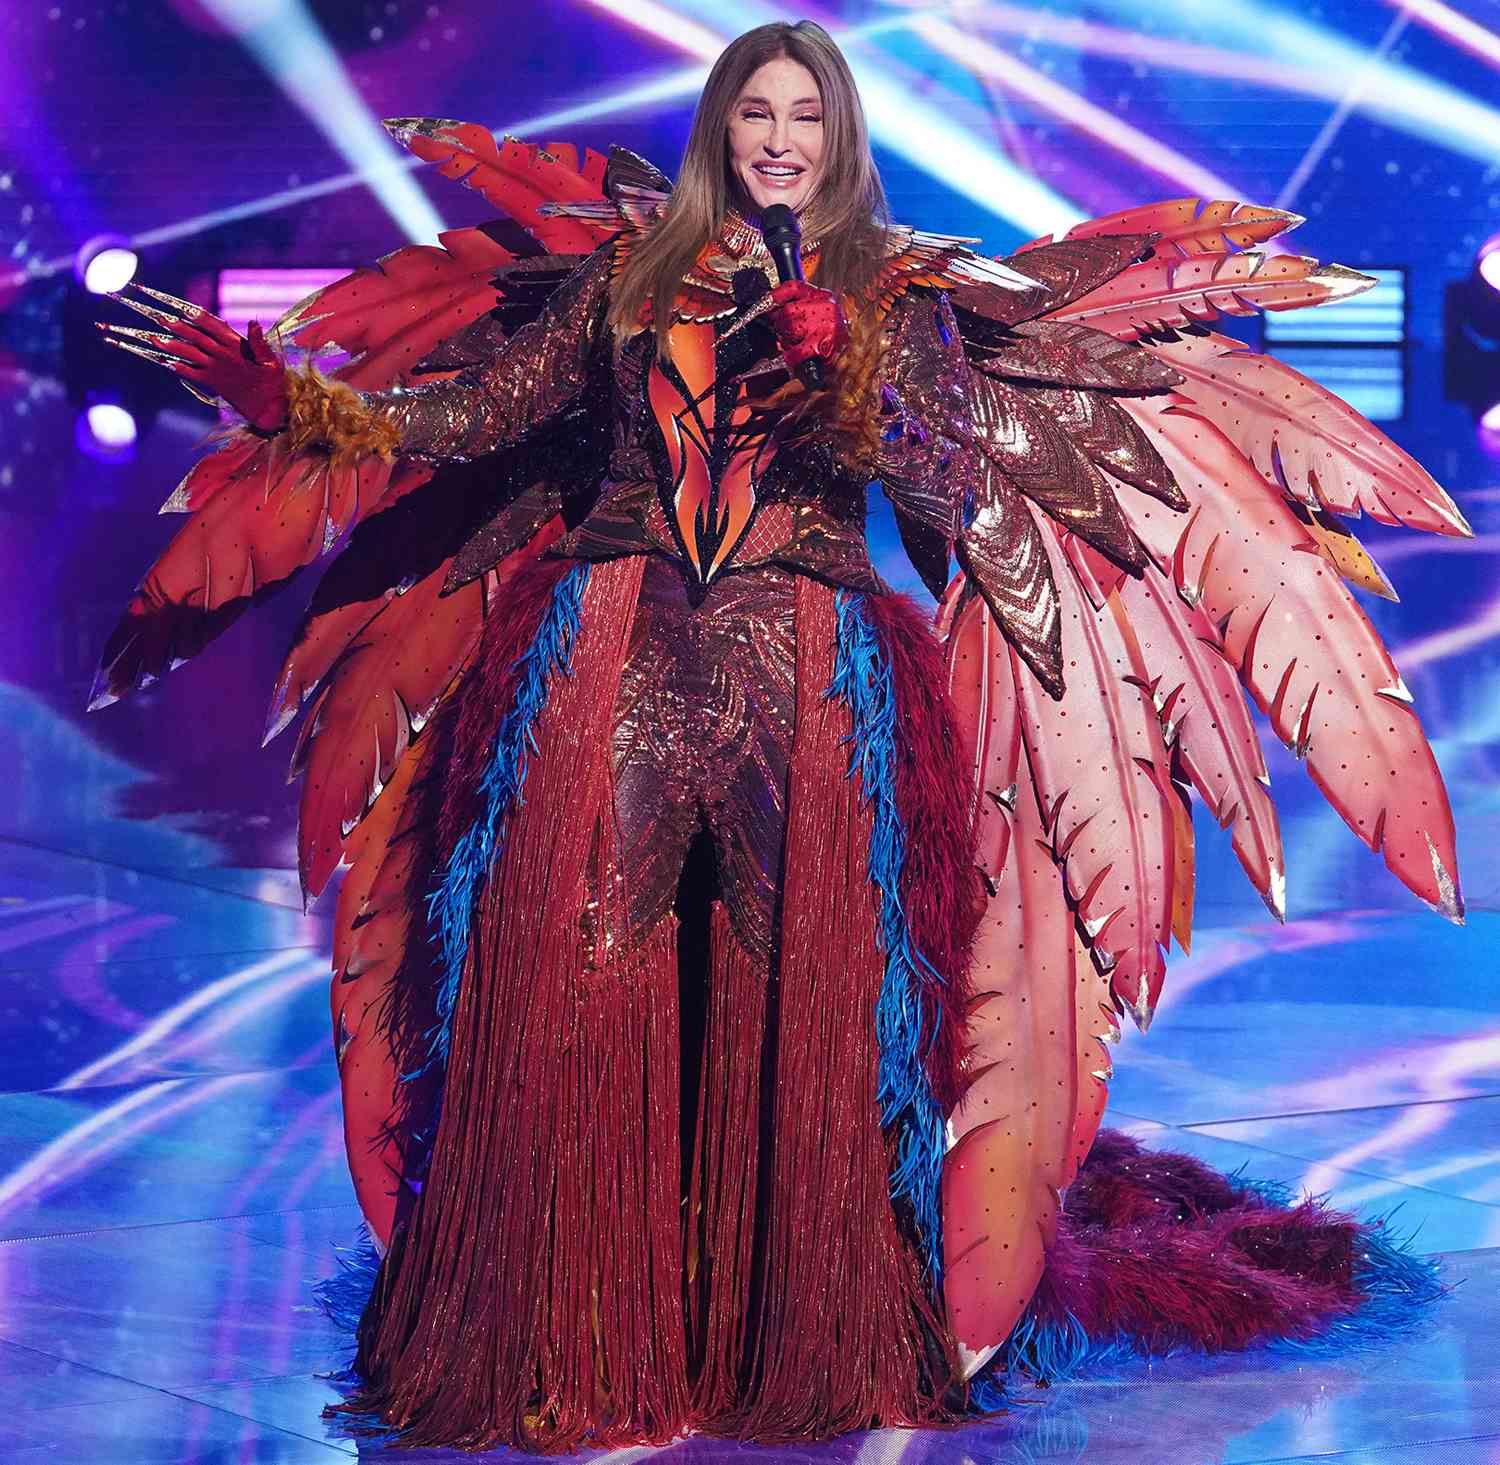 THE MASKED SINGER: Caitlyn Jenner in the “Shamrock and Roll”